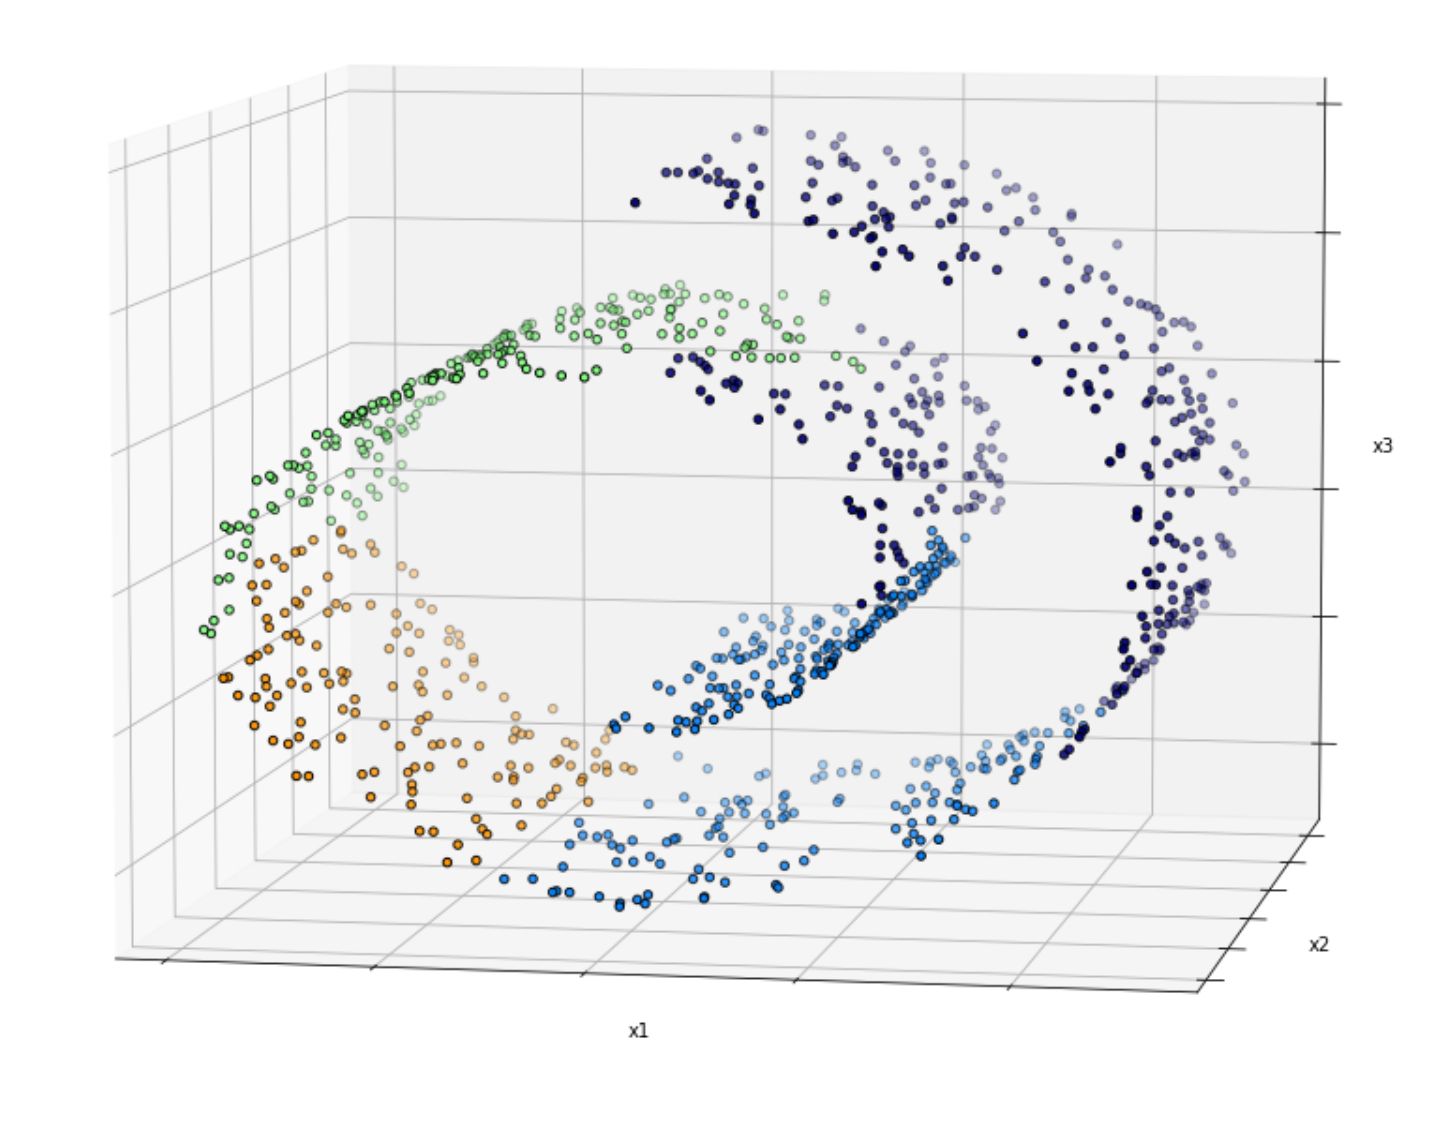 Data points that are placed with a twist and turn in the subspaces